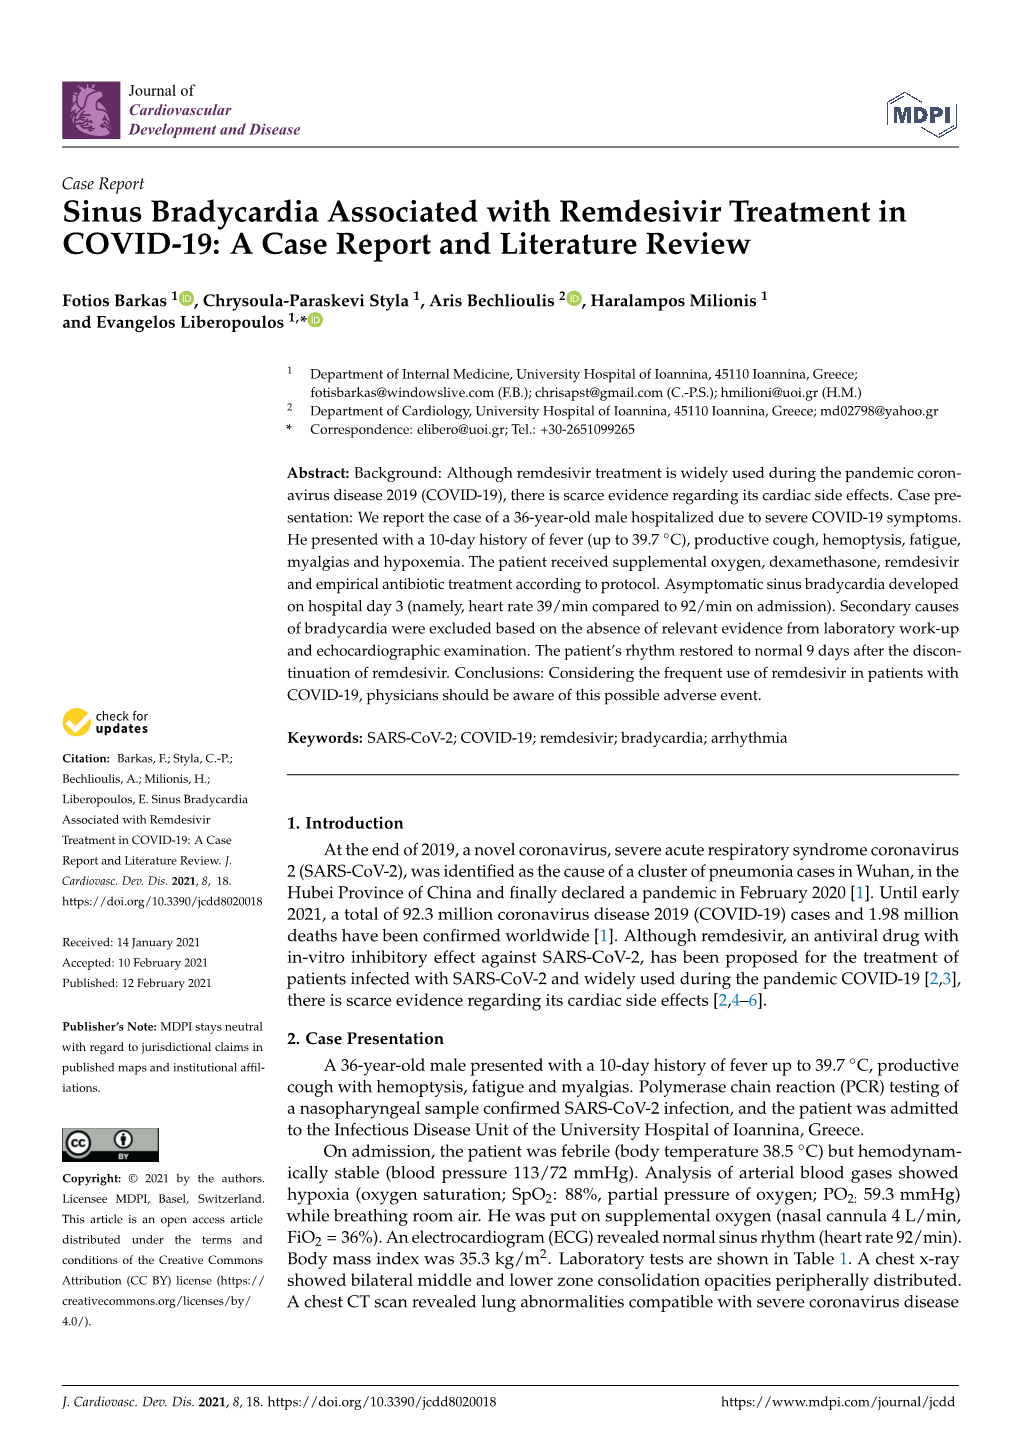 Sinus Bradycardia Associated with Remdesivir Treatment in COVID-19: a Case Report and Literature Review